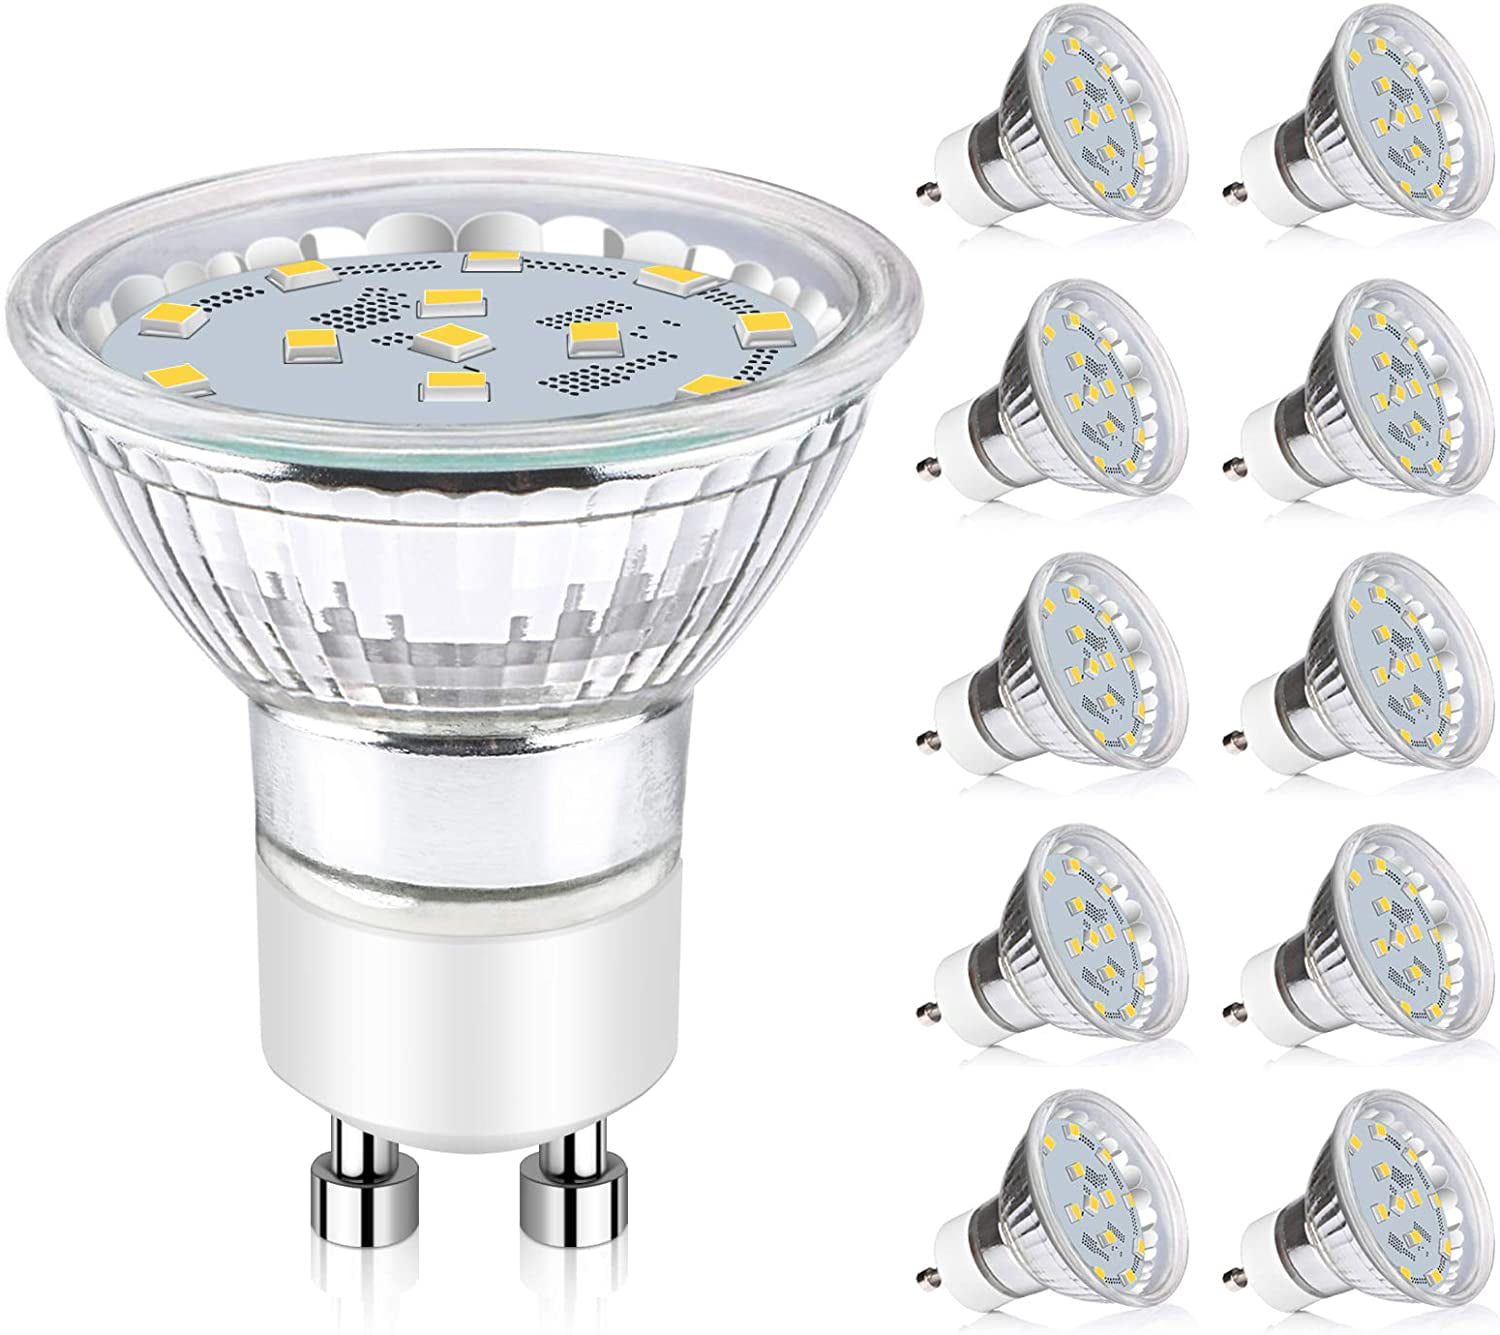 SuperLED Lighting GU10 LED 4W 120V Equivalent to 65W Halogen Dimmable L.E.D 